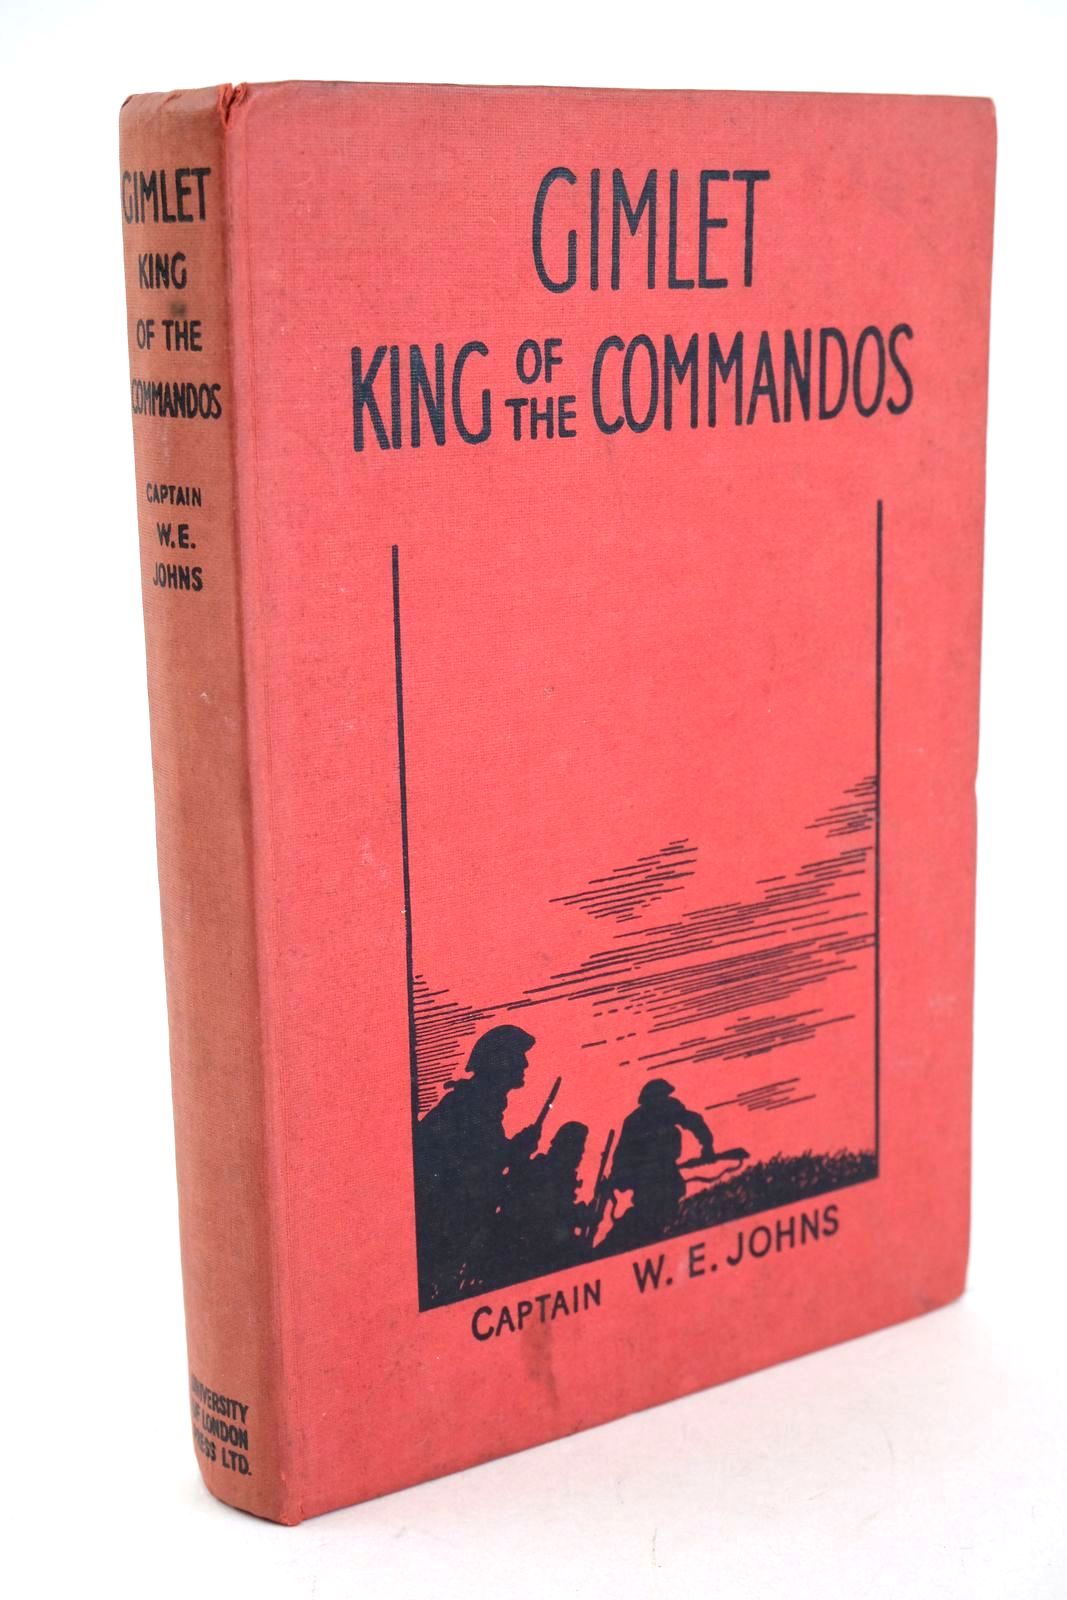 Photo of GIMLET KING OF THE COMMANDOS written by Johns, W.E. published by University of London Press (STOCK CODE: 1327200)  for sale by Stella & Rose's Books